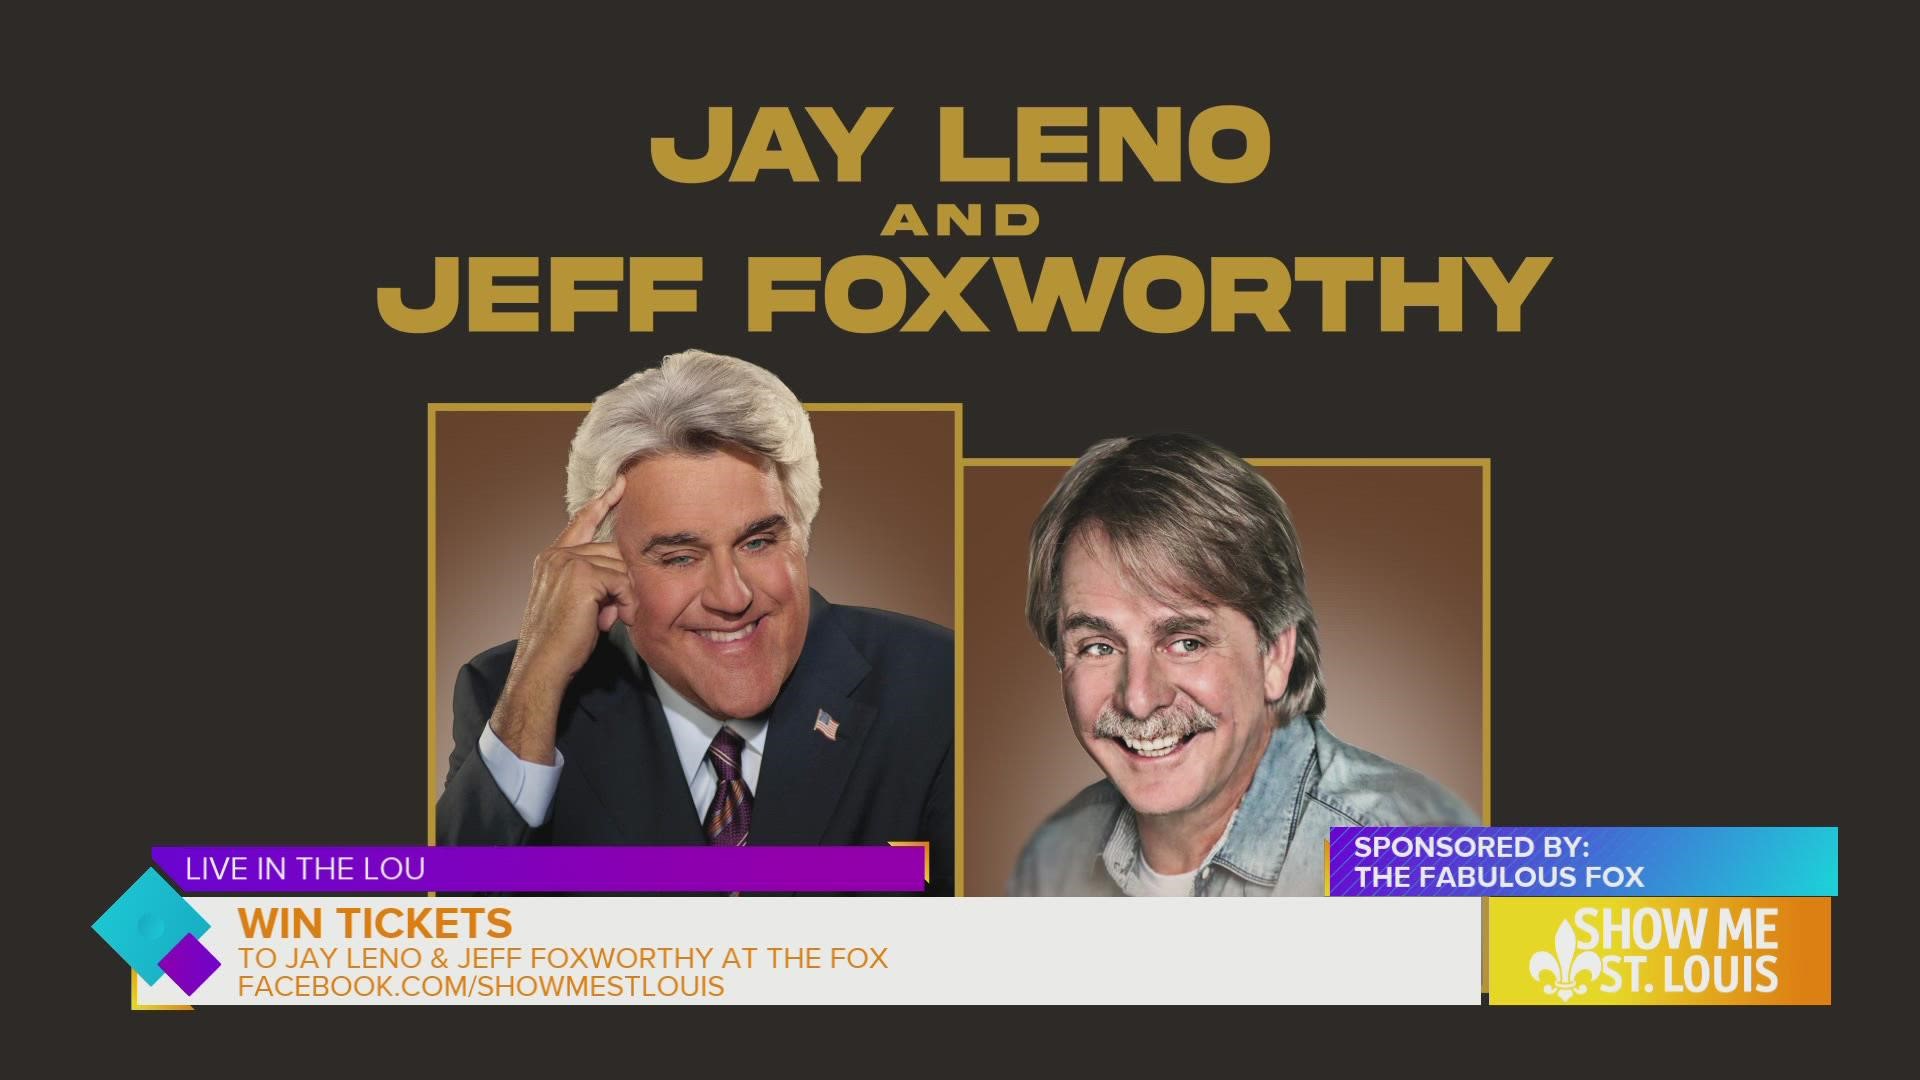 Three (3) winners will receive two (2) tickets Jay Leno and Jeff Foxworthy at the Fabulous Fox on November 18.